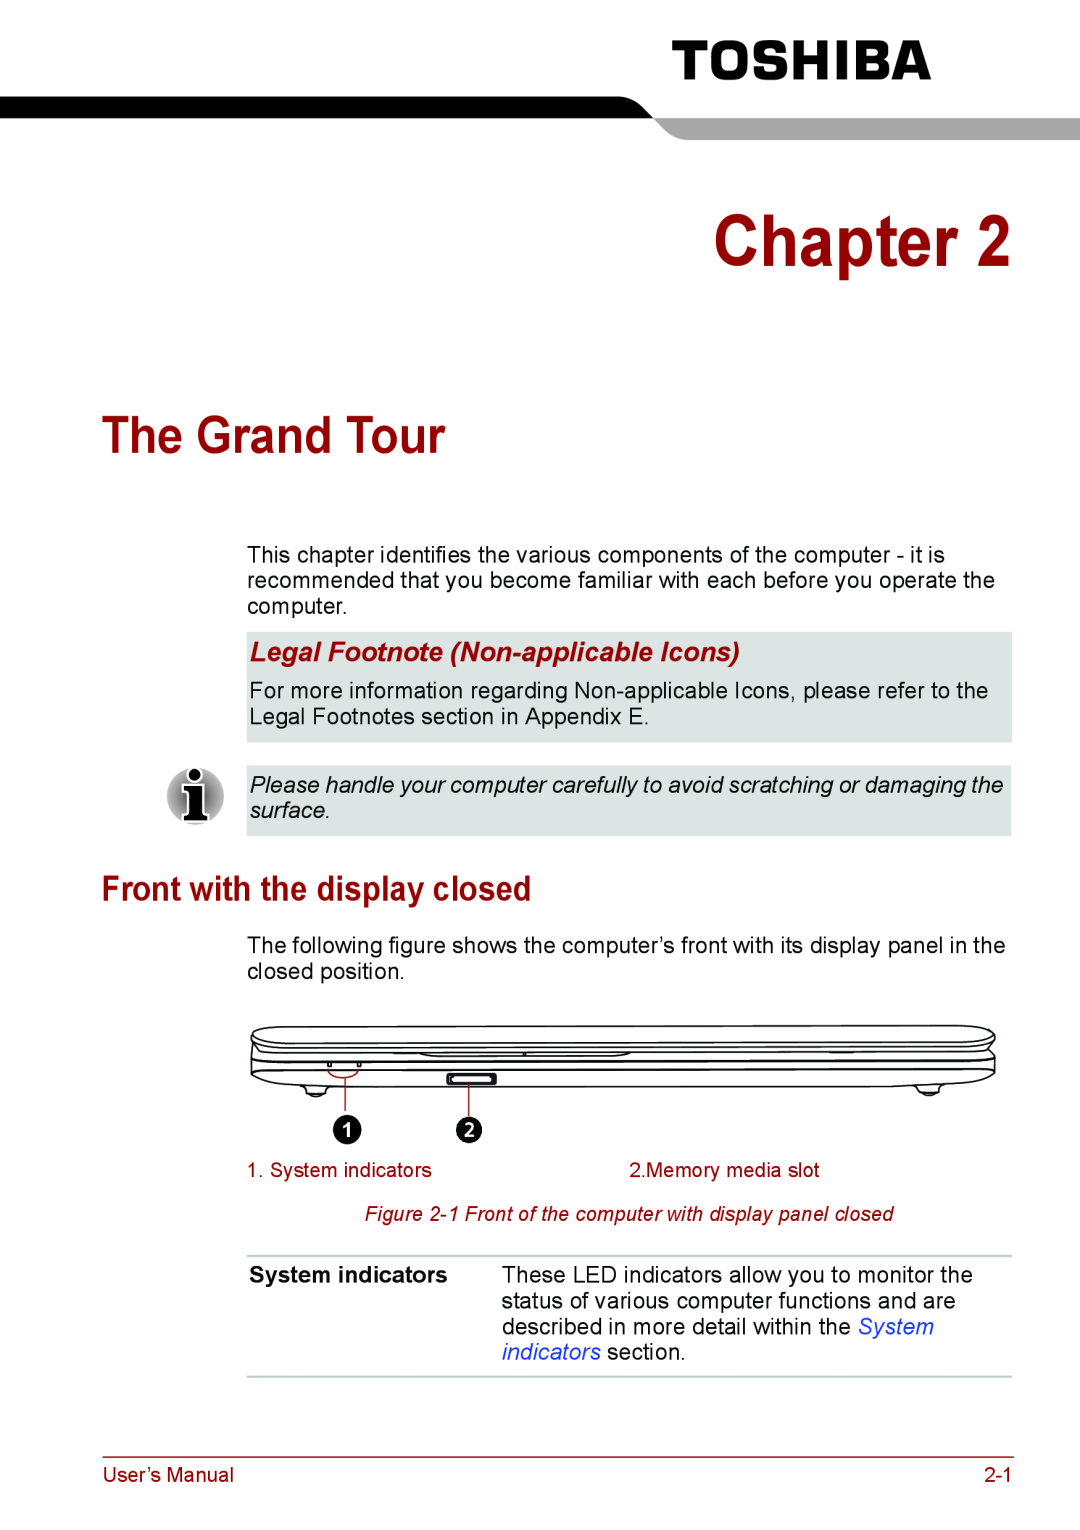 Toshiba PSC08U-02D01D The Grand Tour, Front with the display closed, Legal Footnote Non-applicable Icons, Chapter 